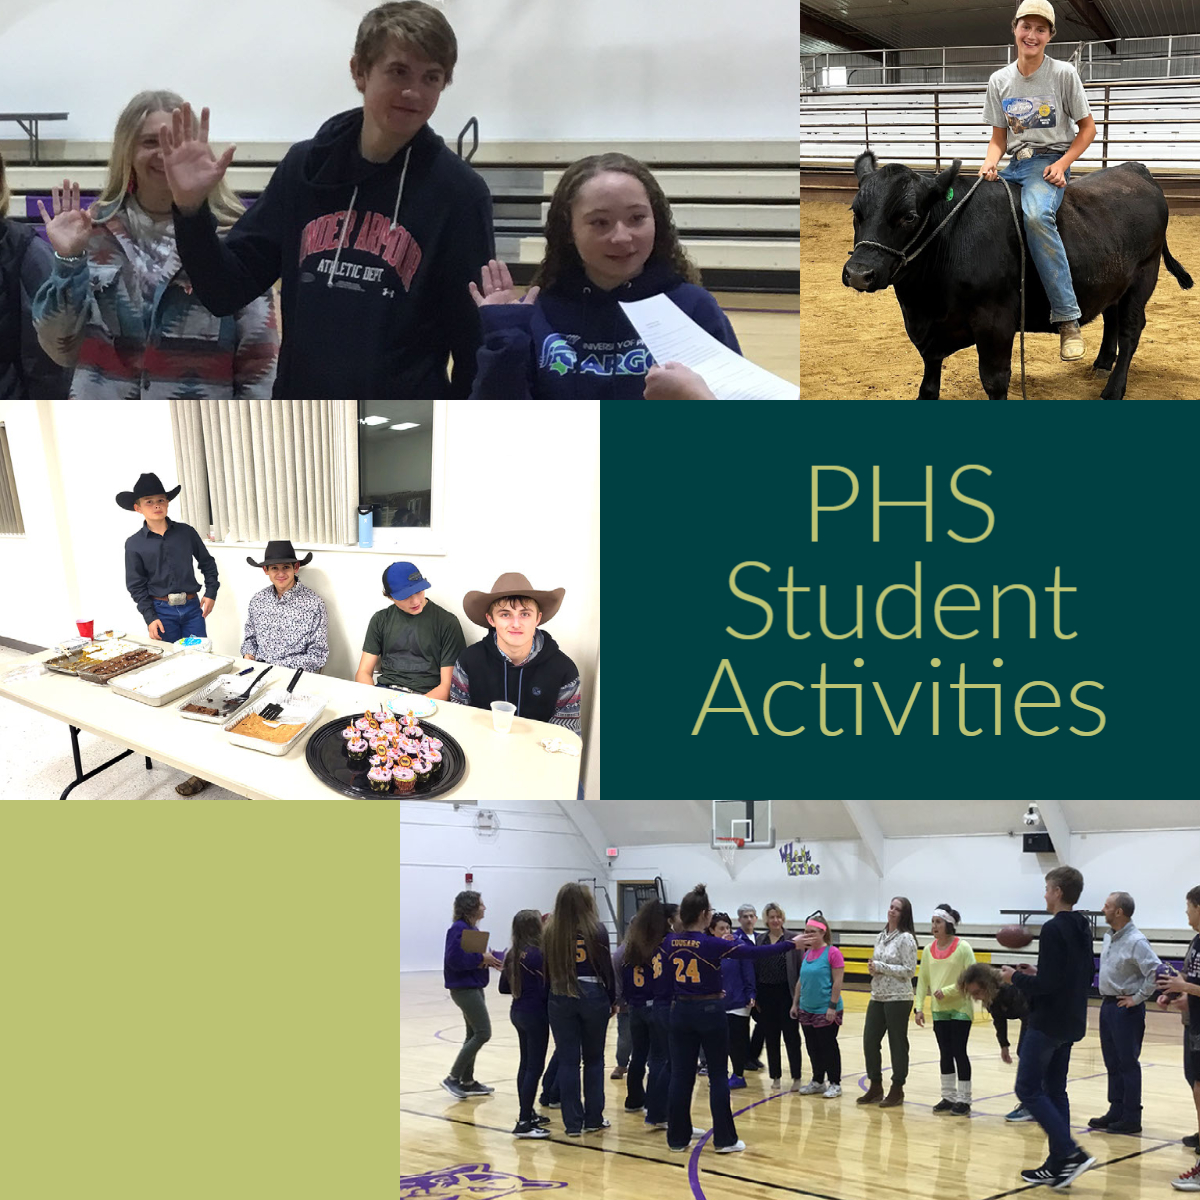 PHS Student Activities - Photo collage